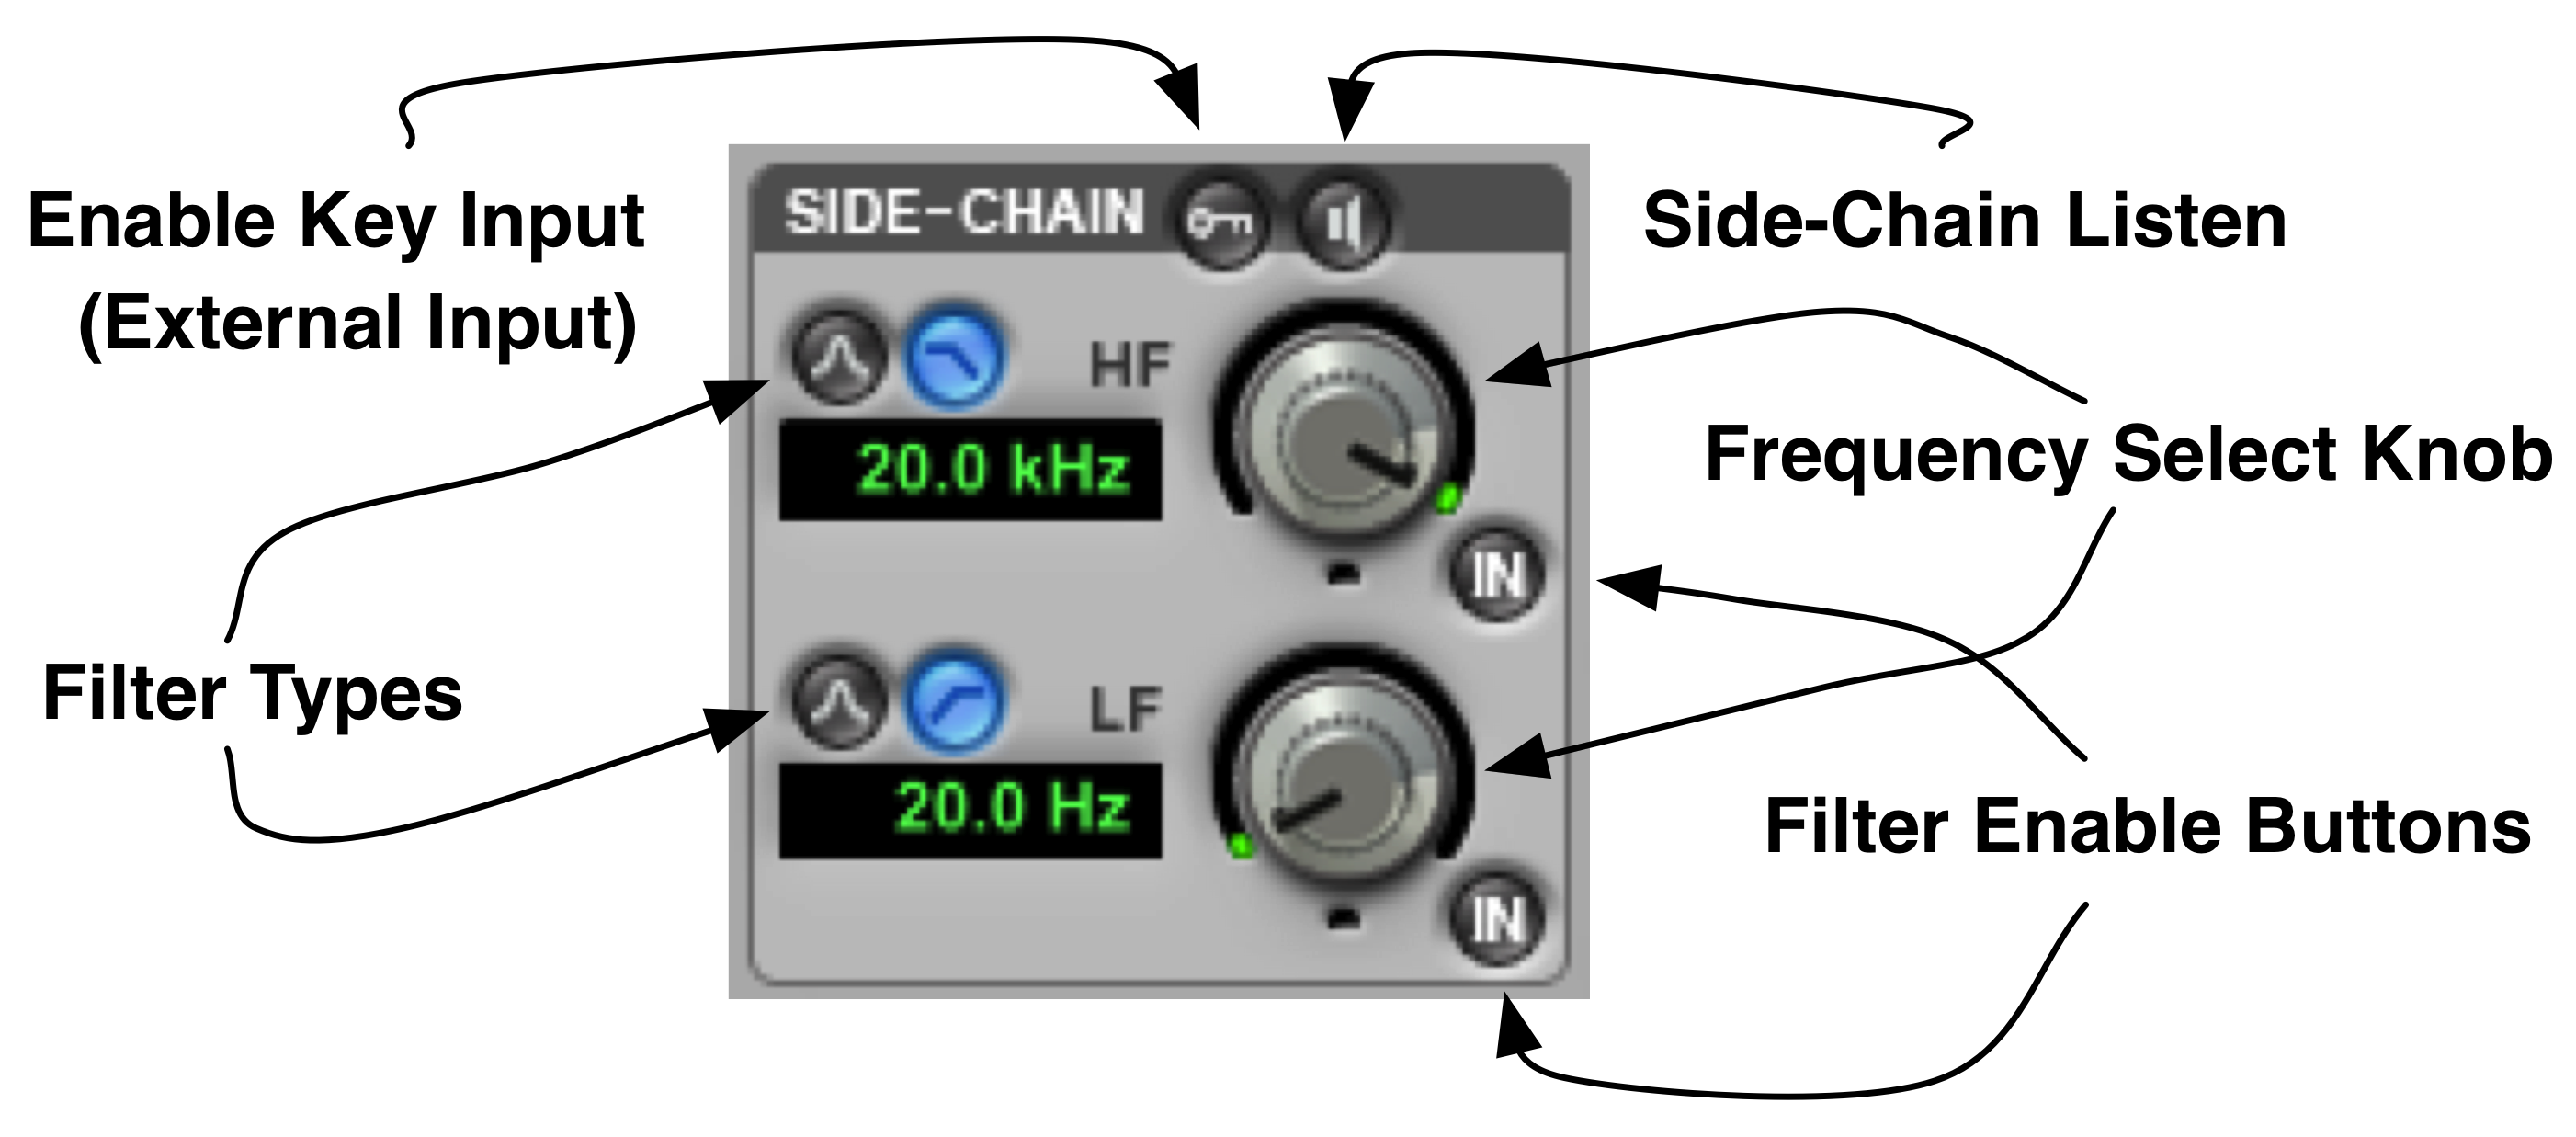 Side chainsection